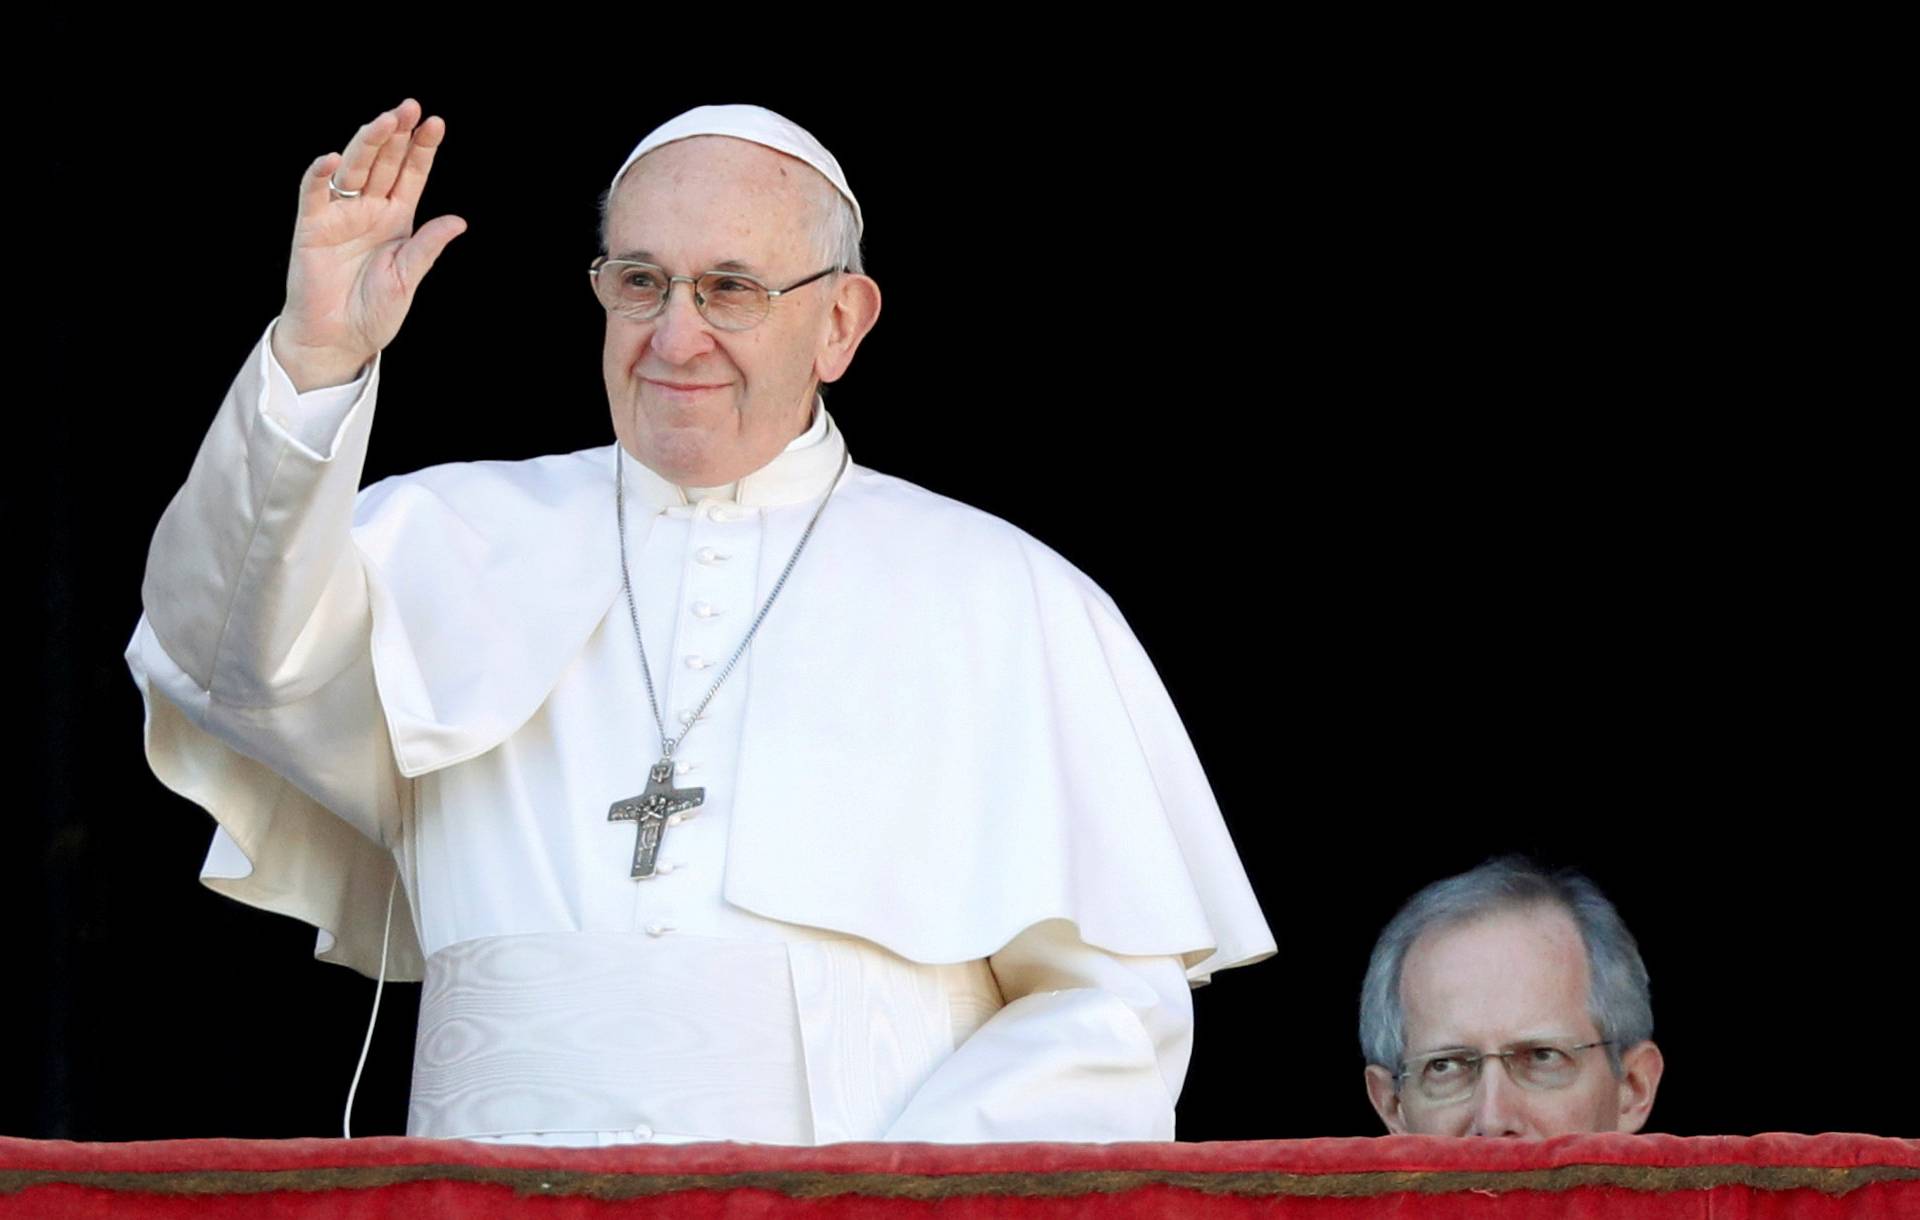 FILE PHOTO: Pope Francis waves as he arrives to deliver the "Urbi et Orbi" message from the main balcony of Saint Peter's Basilica at the Vatican